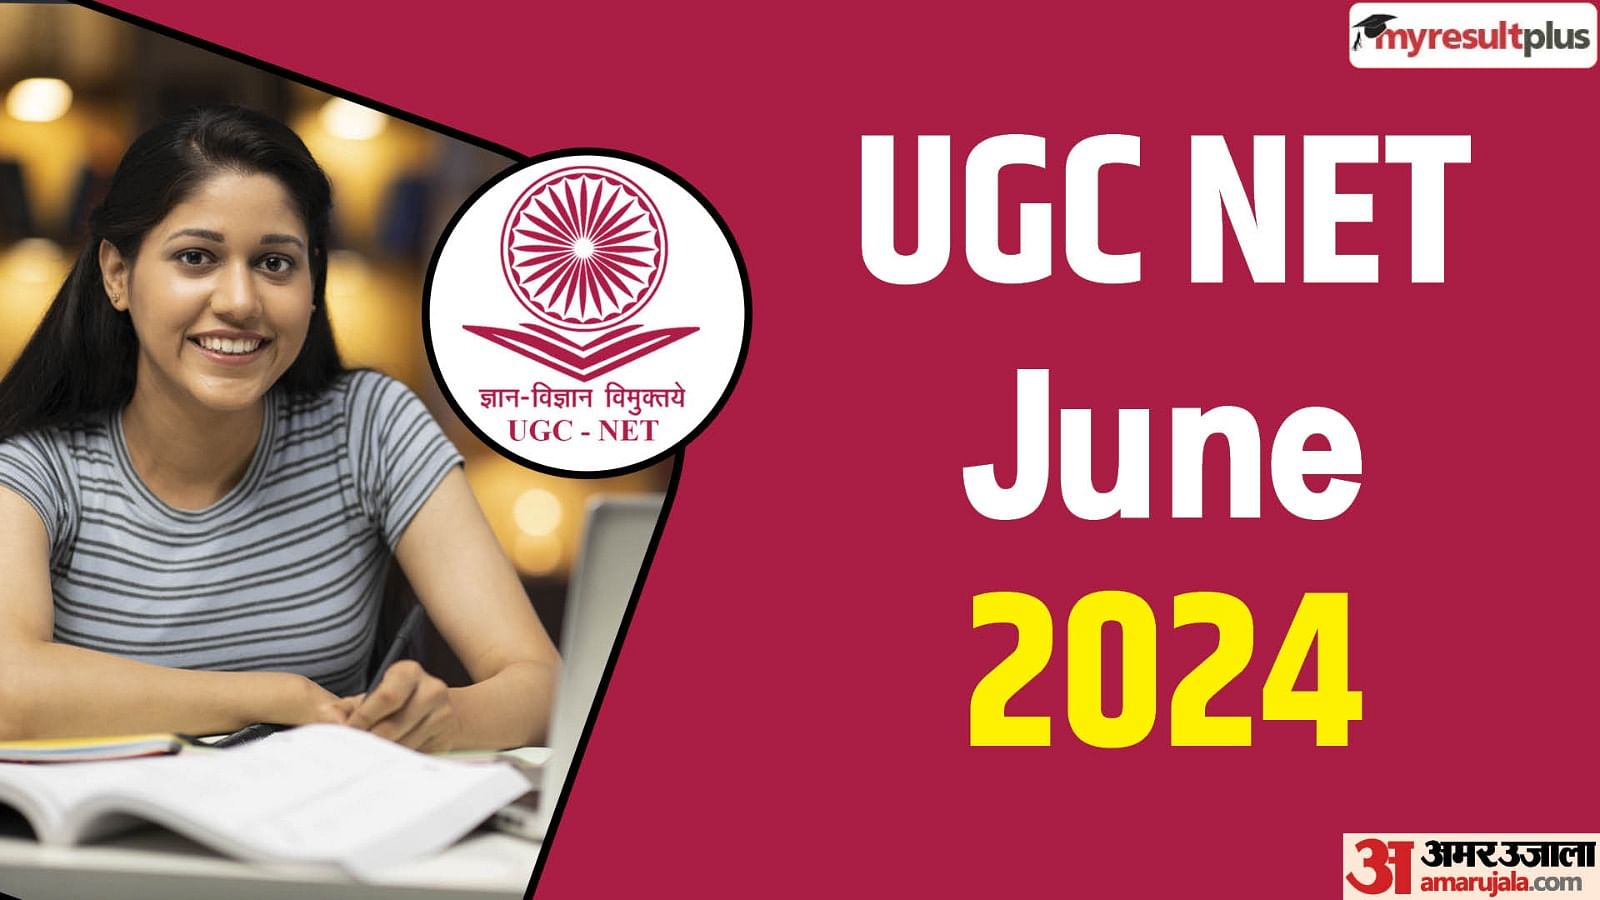 UGC NET 2024 registration window closing today, Apply at ugcnet.nta.ac.in now, Read more details here